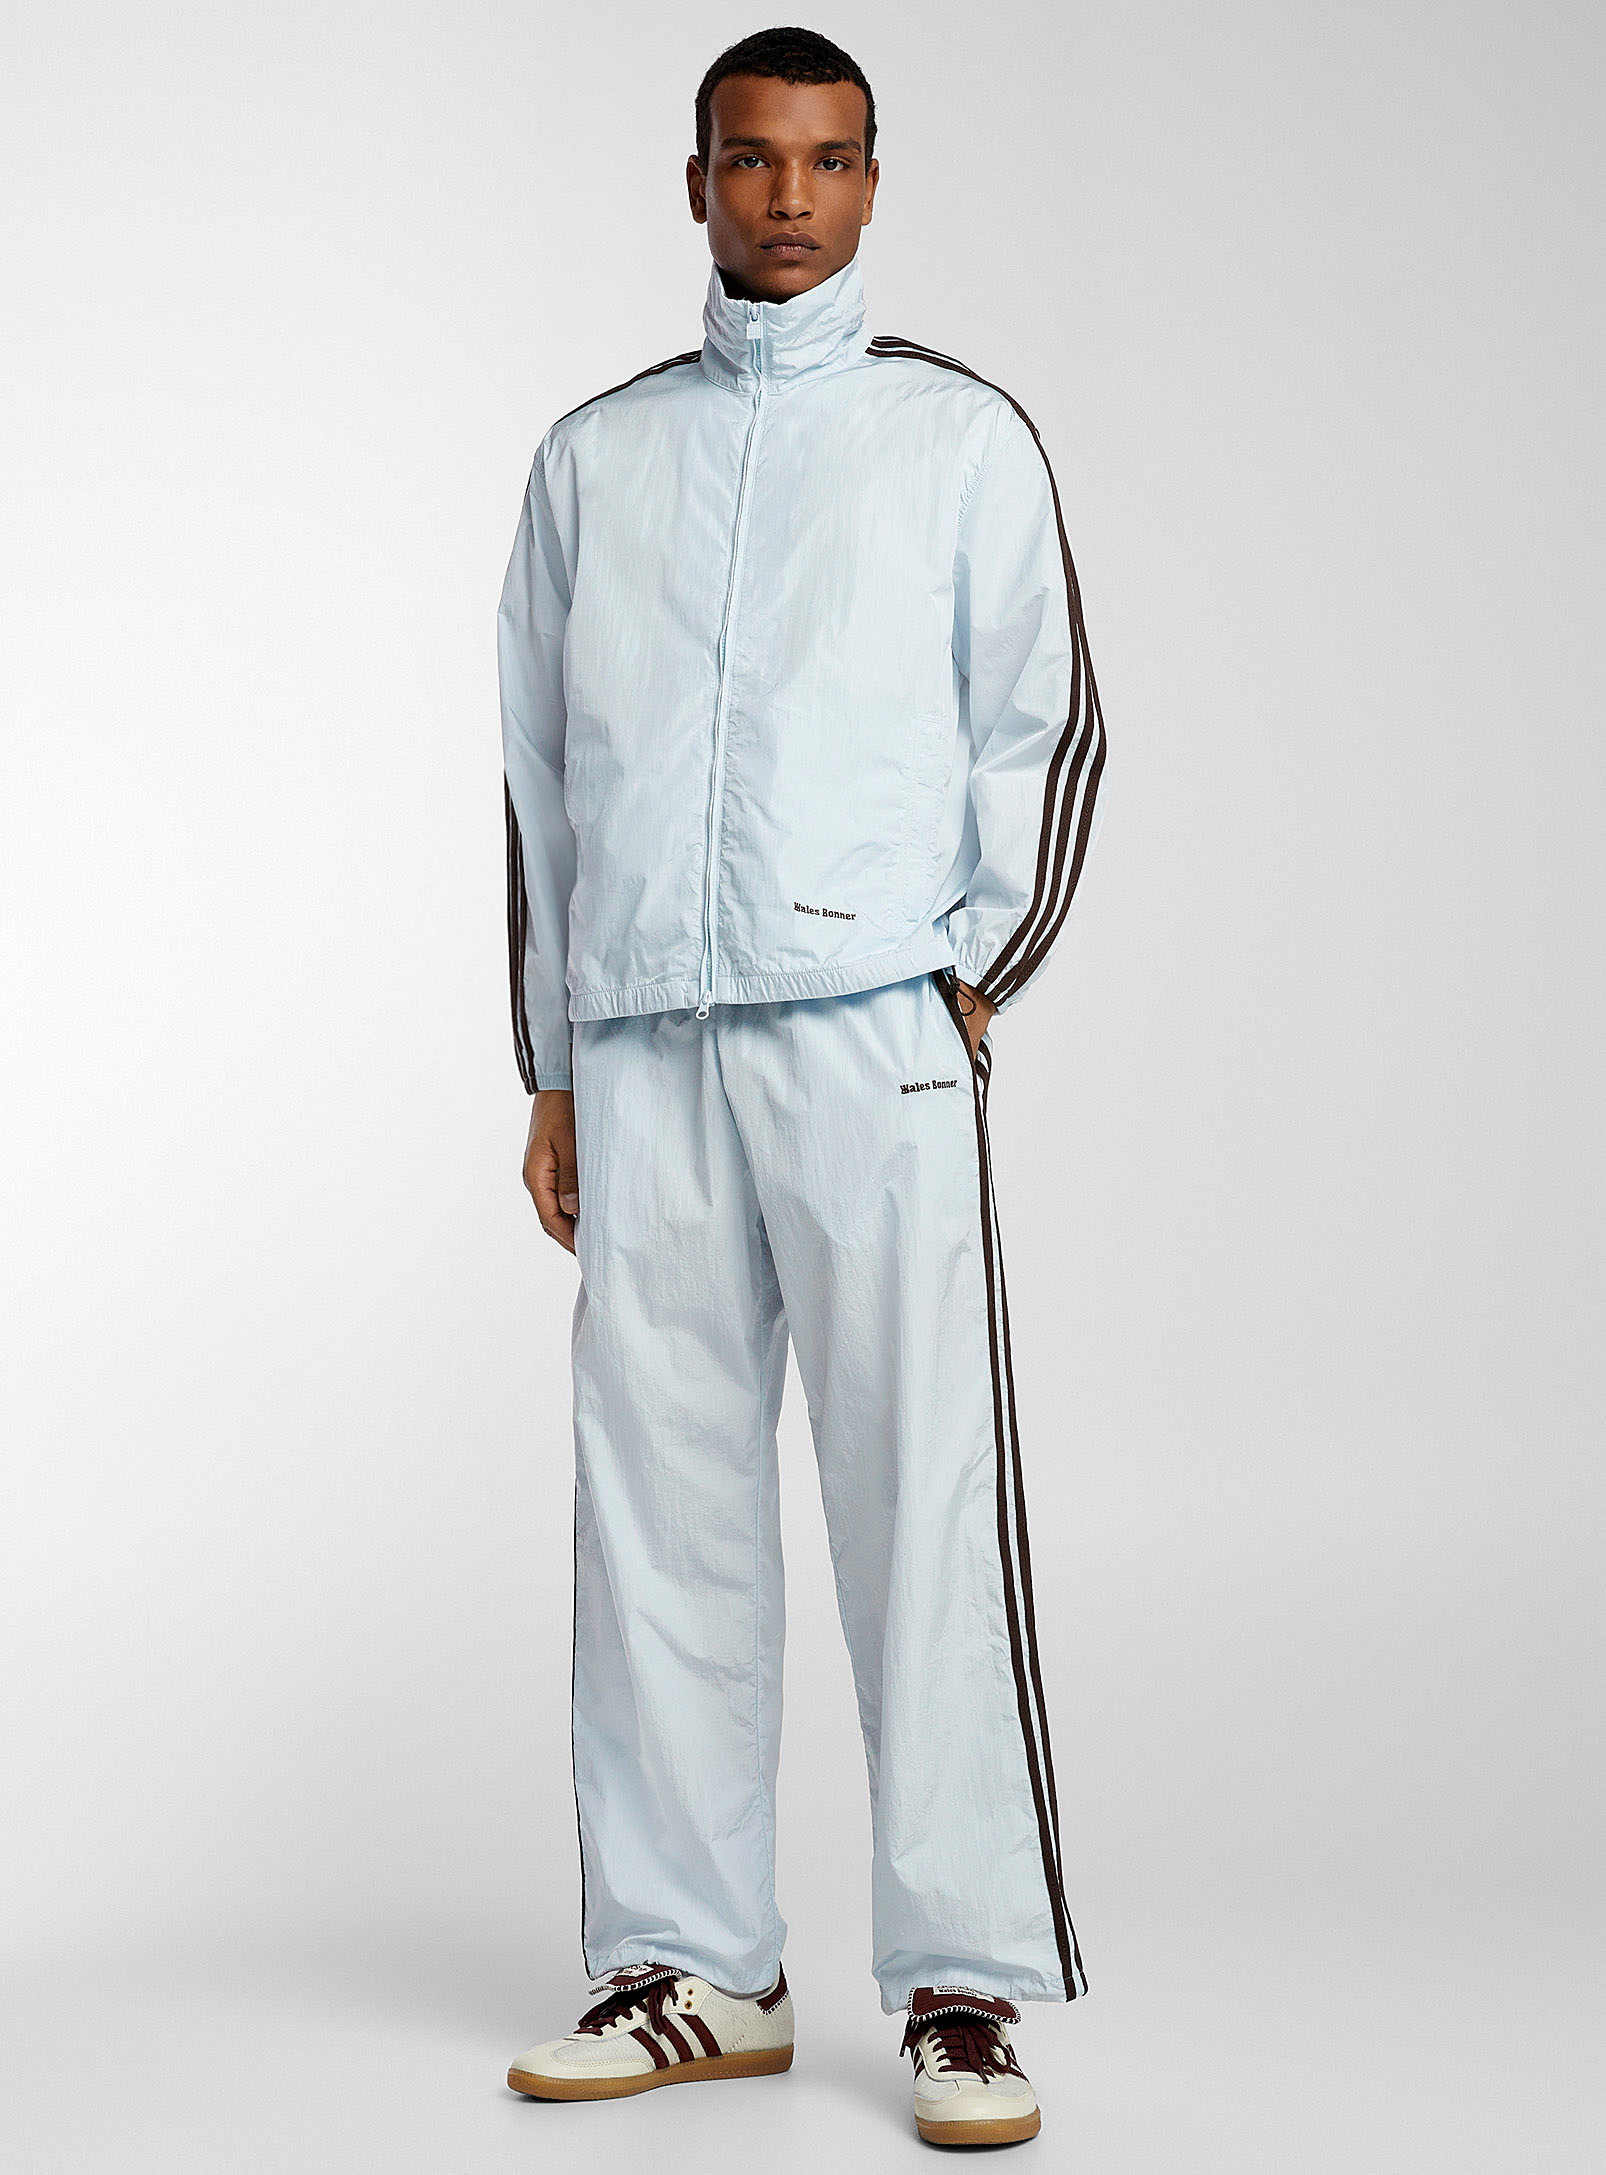 Adidas X Wales Bonner Accent Stripes Track Pant In Blue